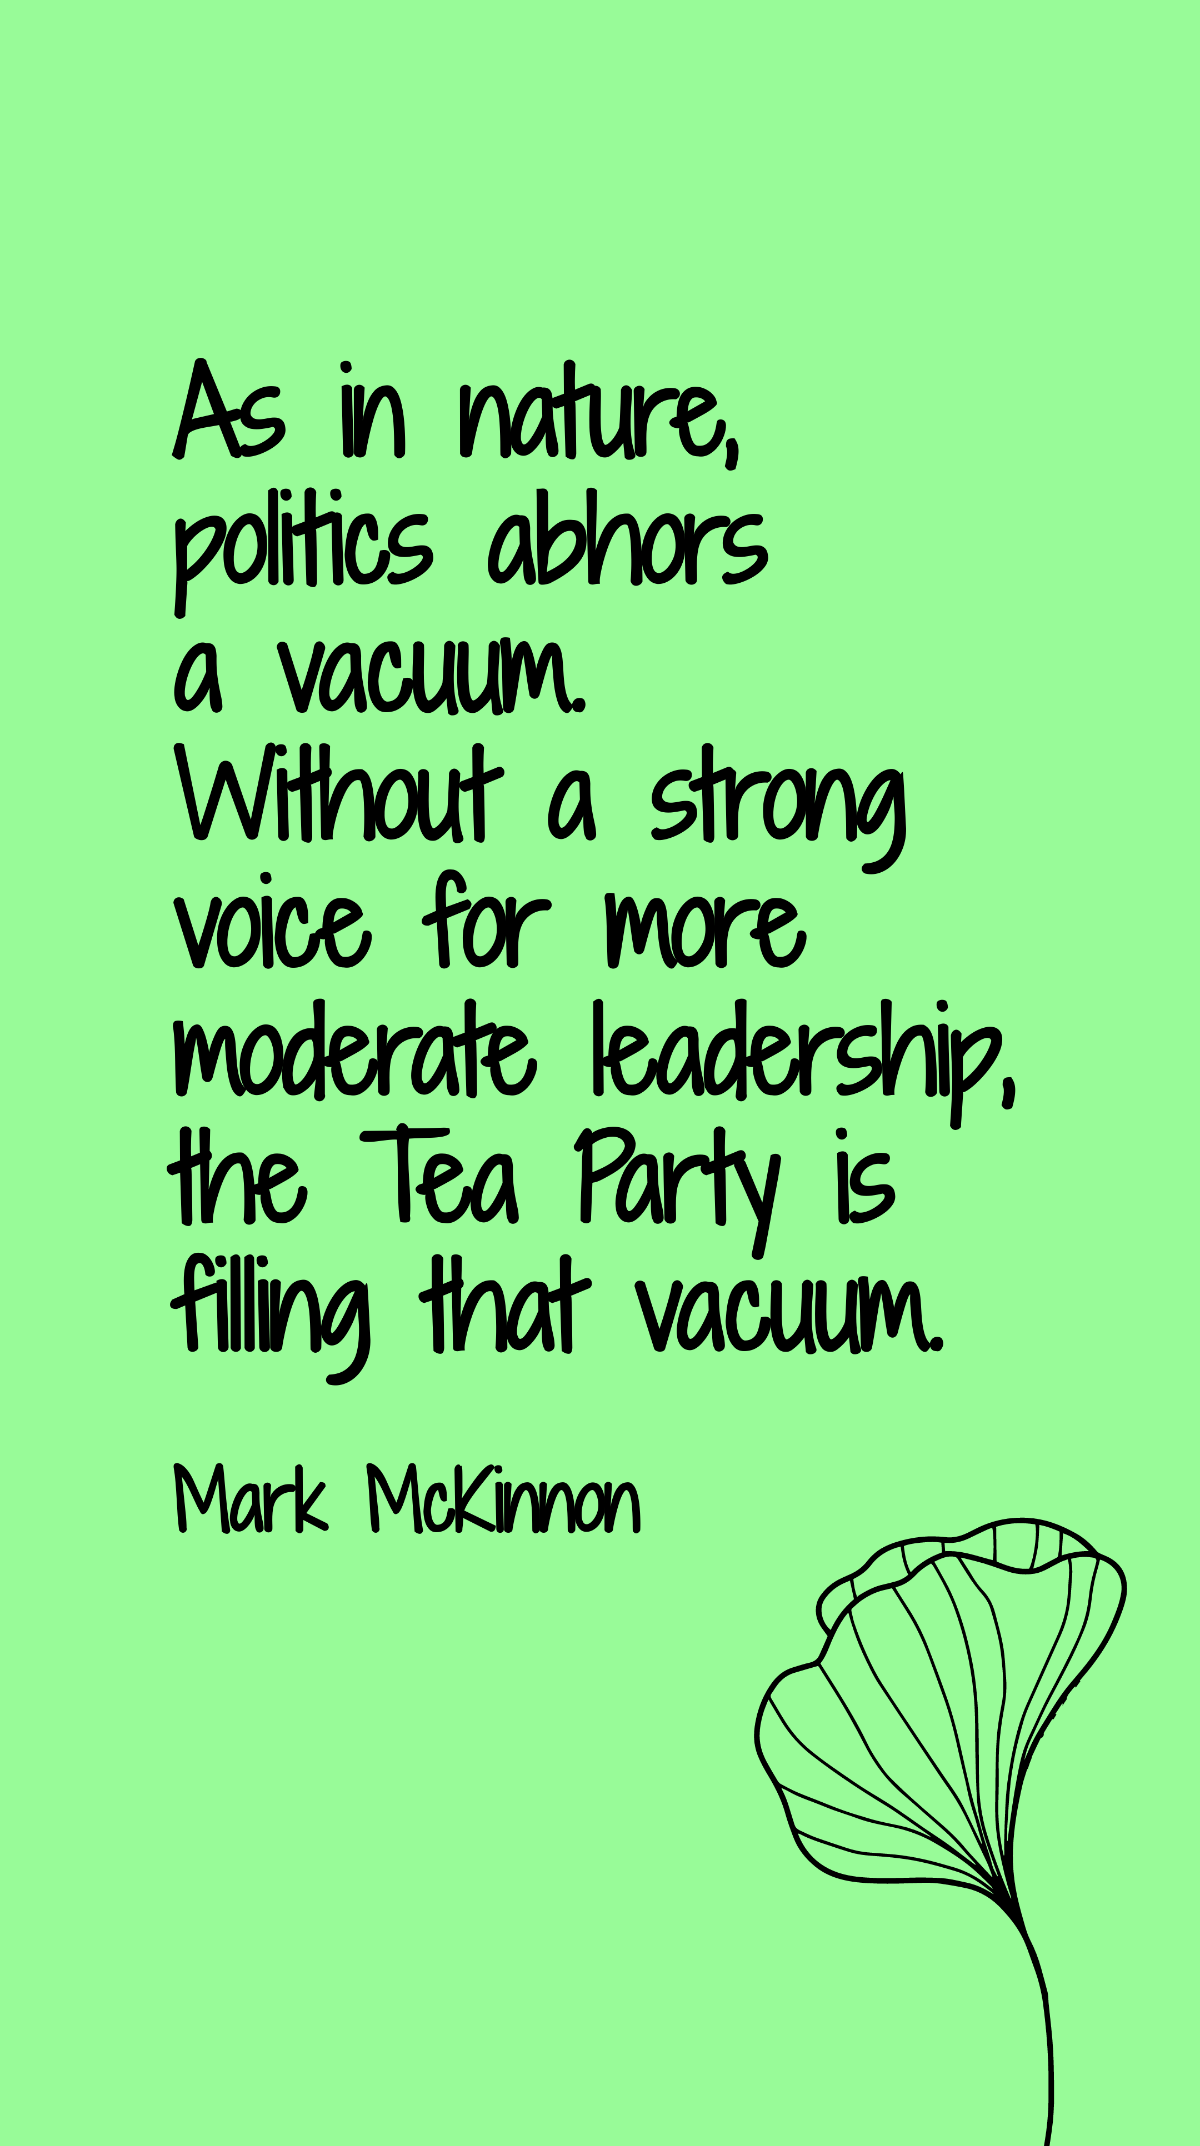 Mark McKinnon - As in nature, politics abhors a vacuum. Without a strong voice for more moderate leadership, the Tea Party is filling that vacuum. Template